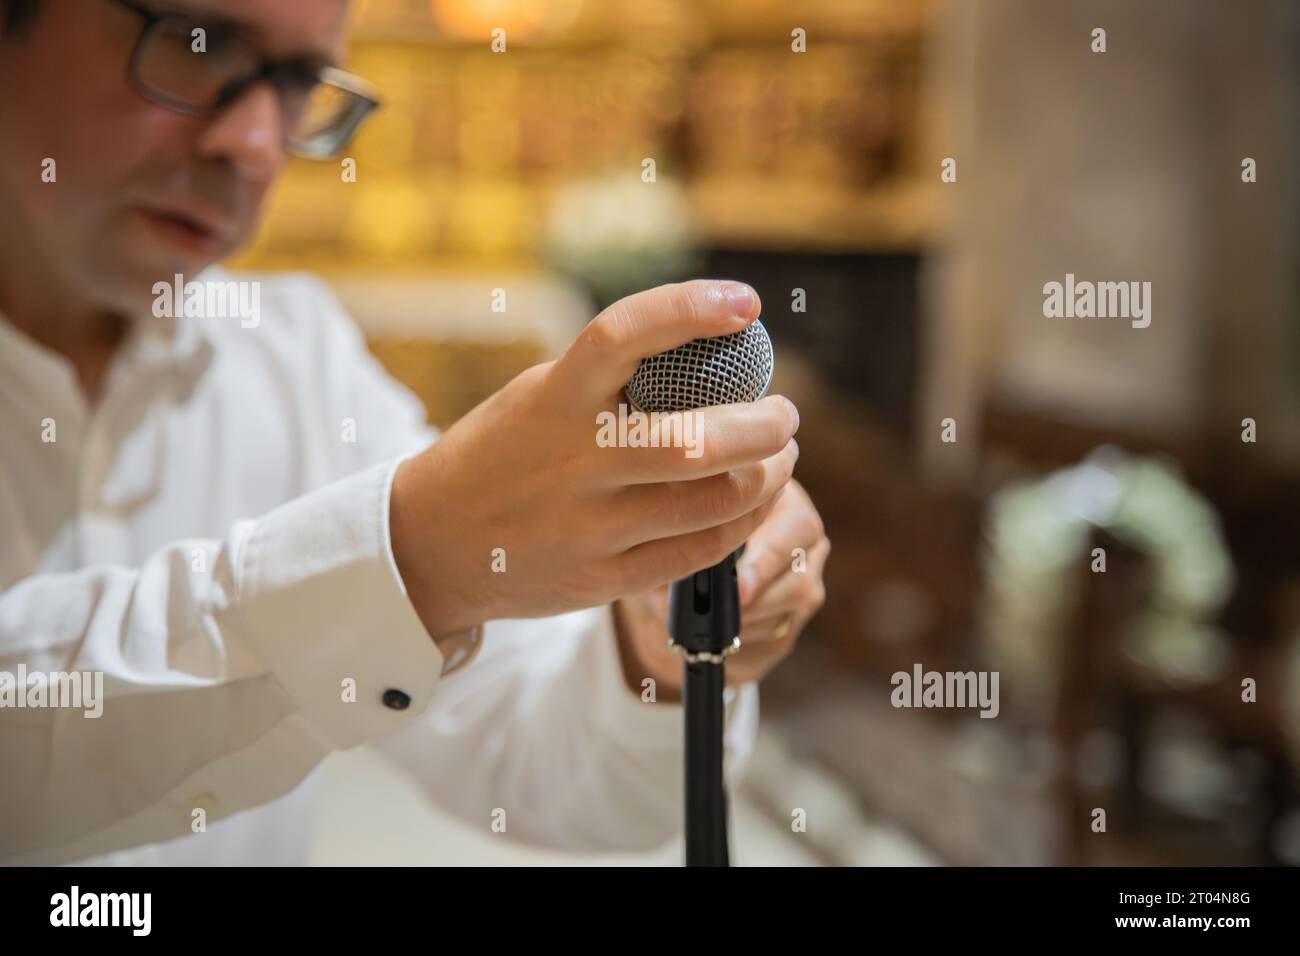 Man holding and preparing microphone to use in musical performance. Rustic interior environment, example temple or church. Close up Stock Photo